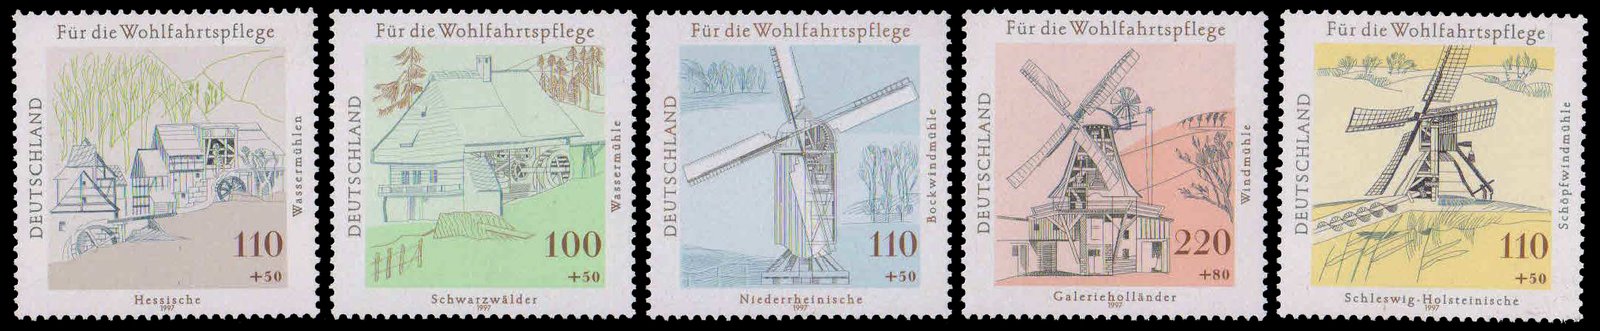 GERMANY 1997-Mills, Humanitarian Relief Funds, Windmill, Water Mill, Post Mill, Set of 5, MNH, S.G. 2814-18